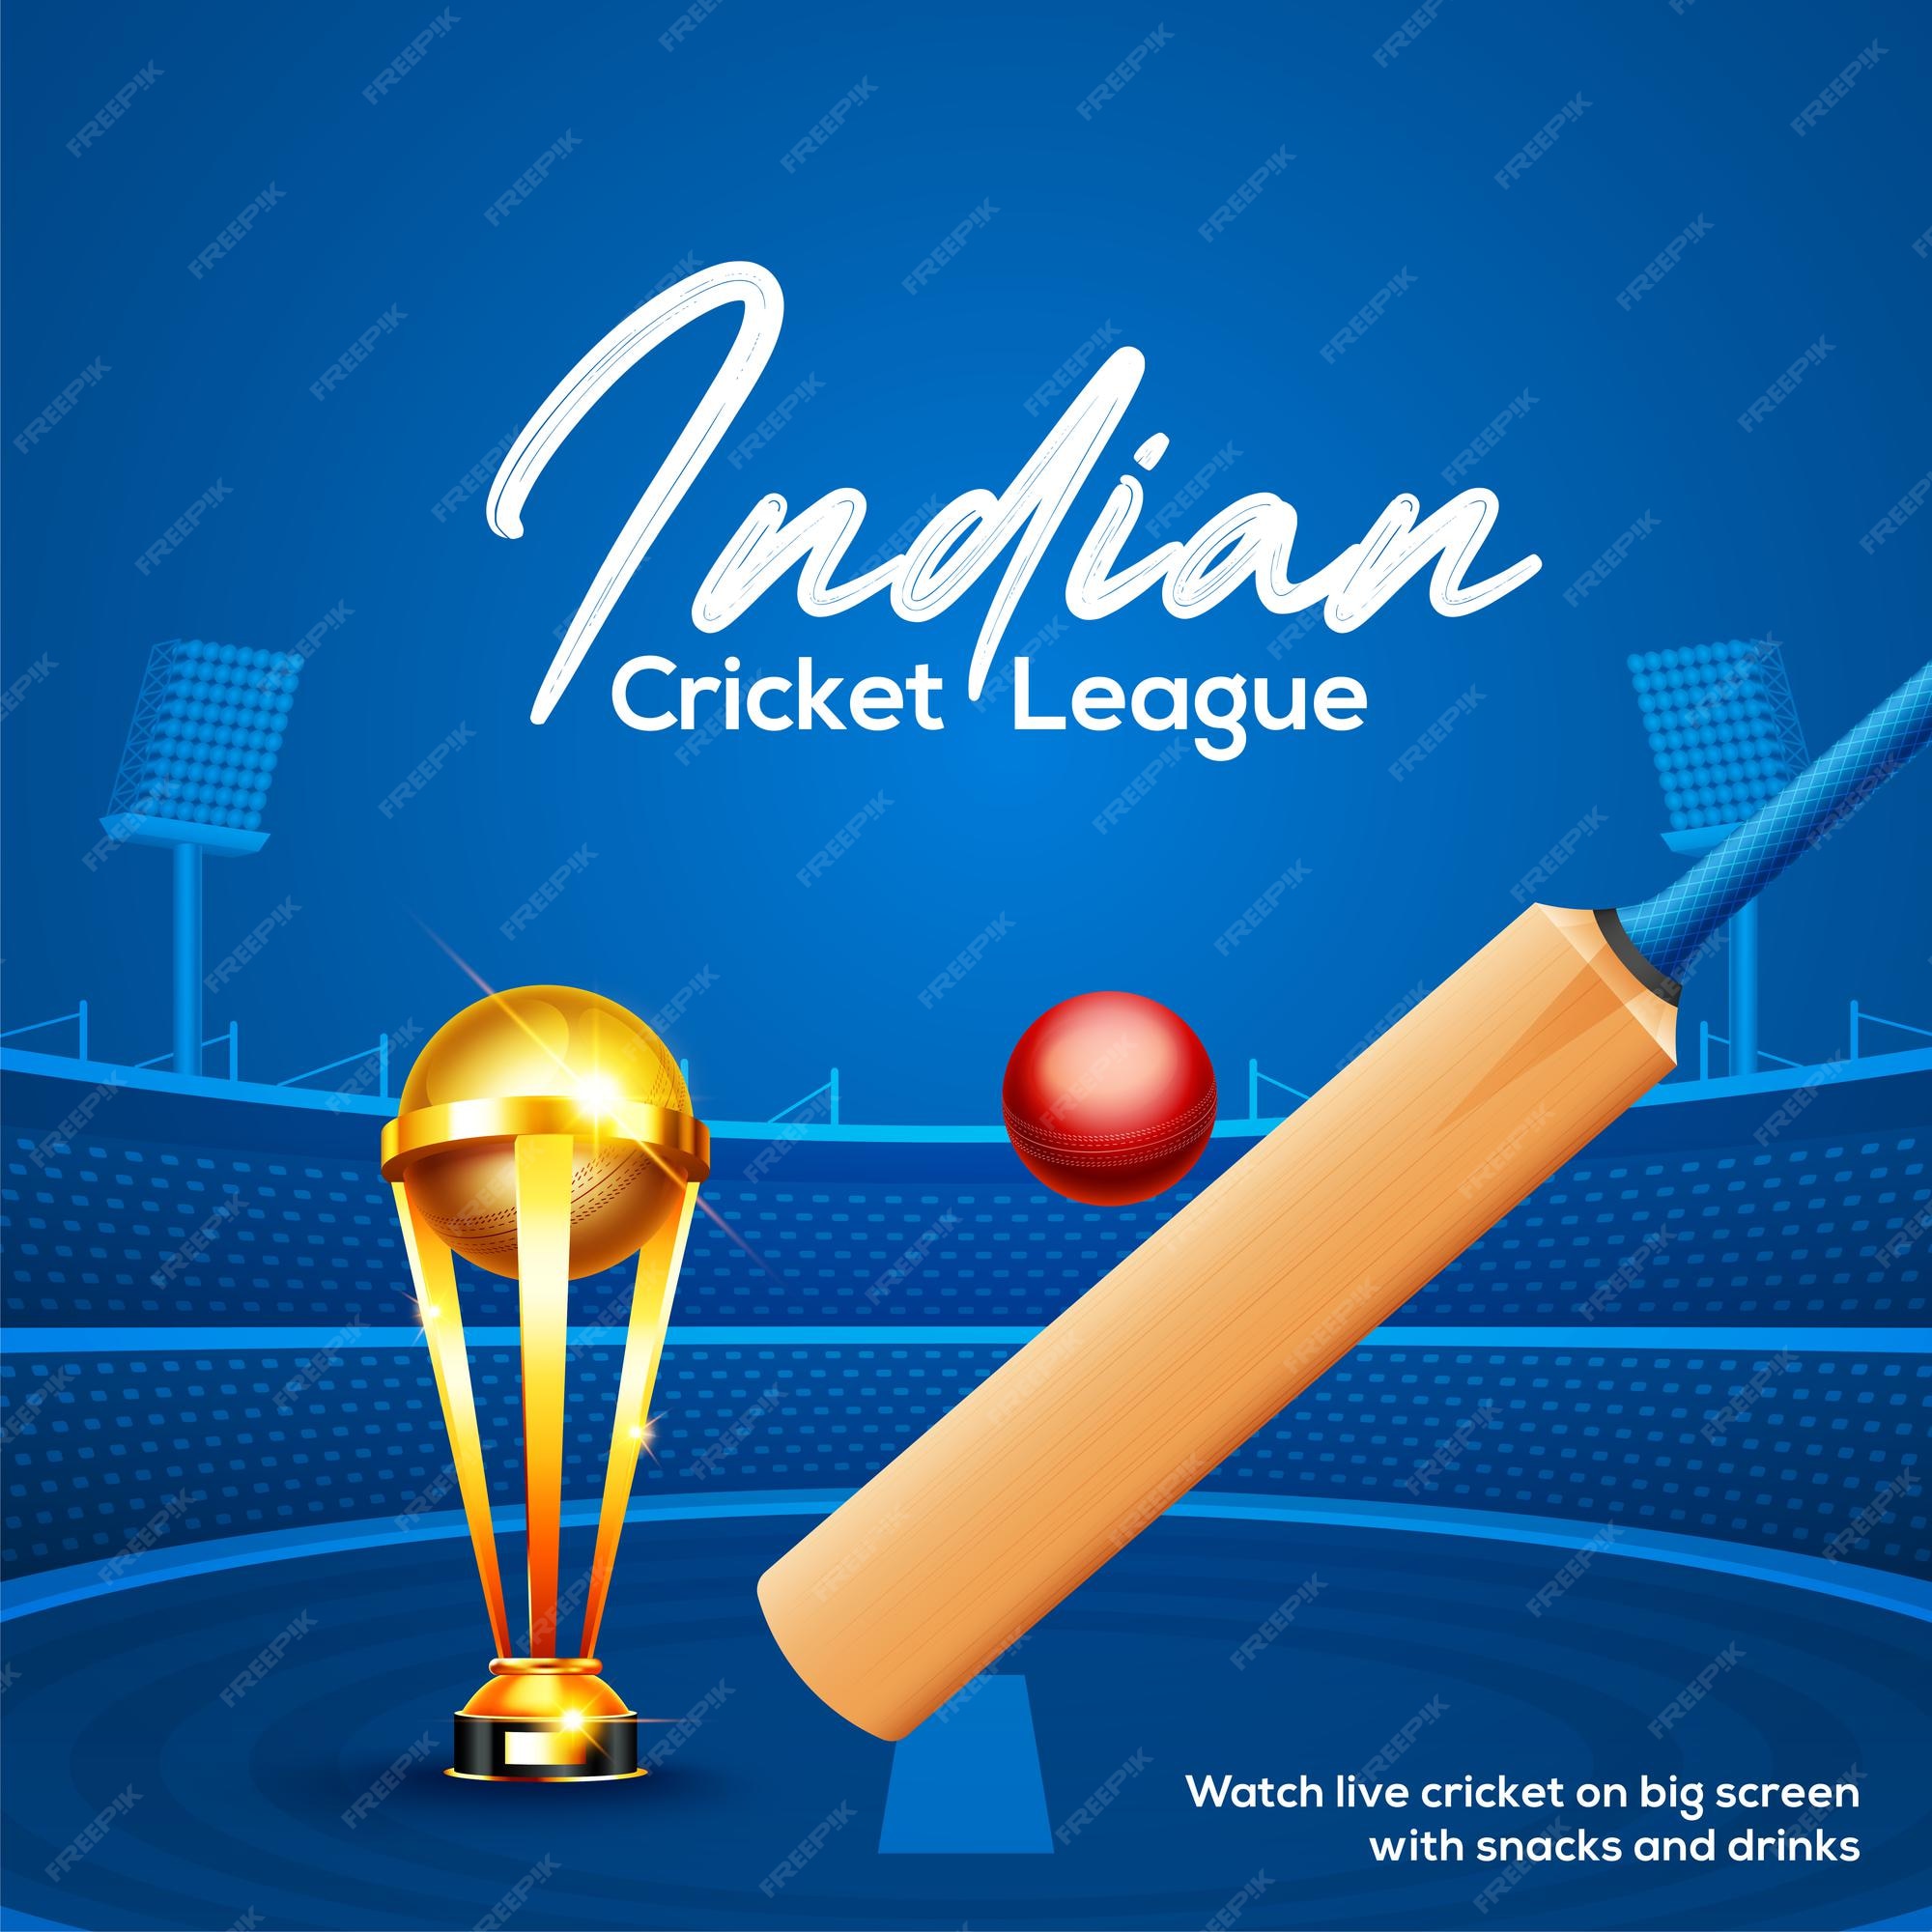 Premium Vector | Cricket championship league concept with cricket bat, ball  and winning cup trophy poster or banner on blue cricket stadium background